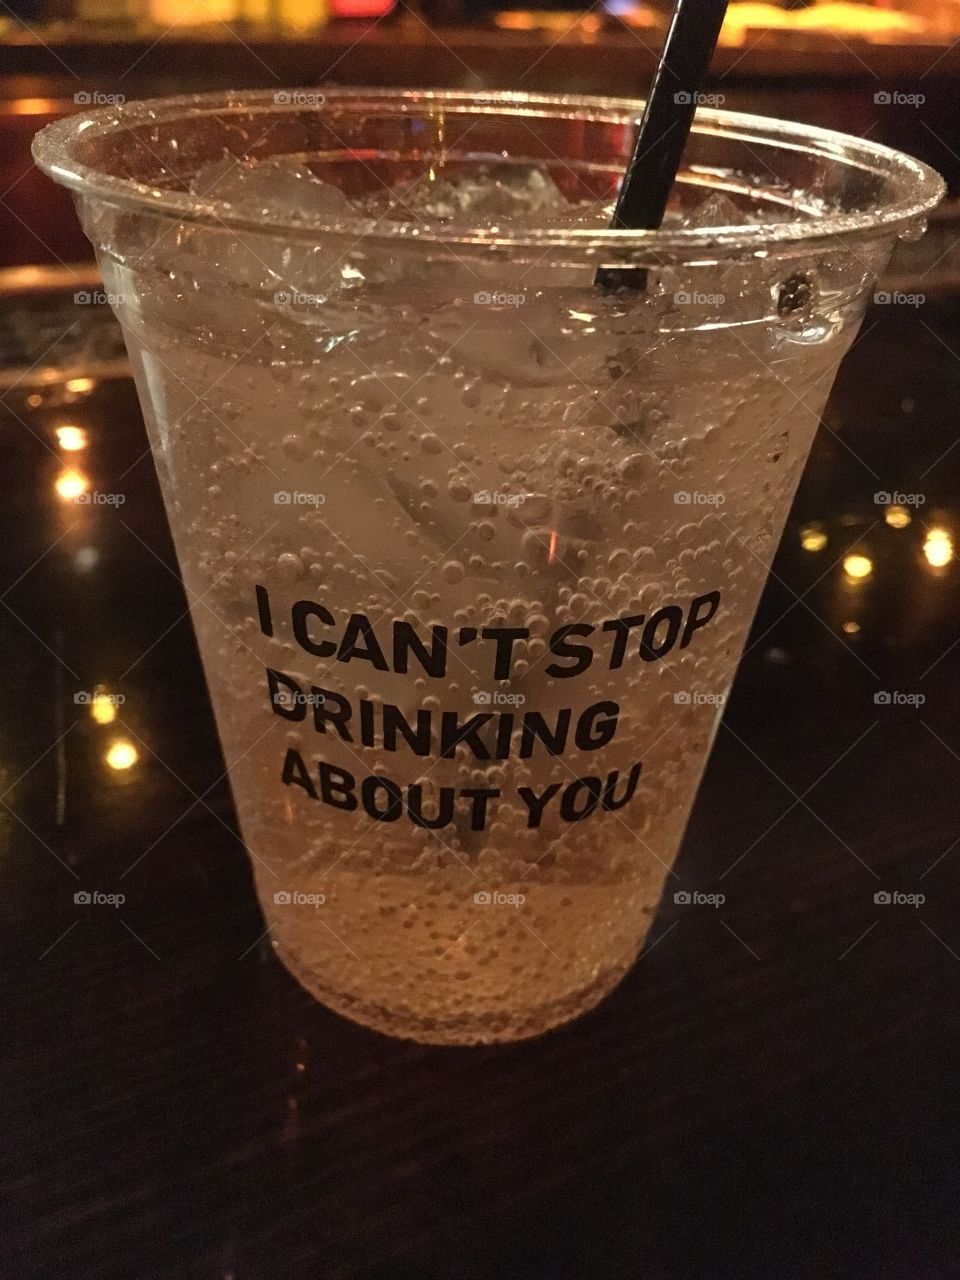 I can’t stop drinking about you